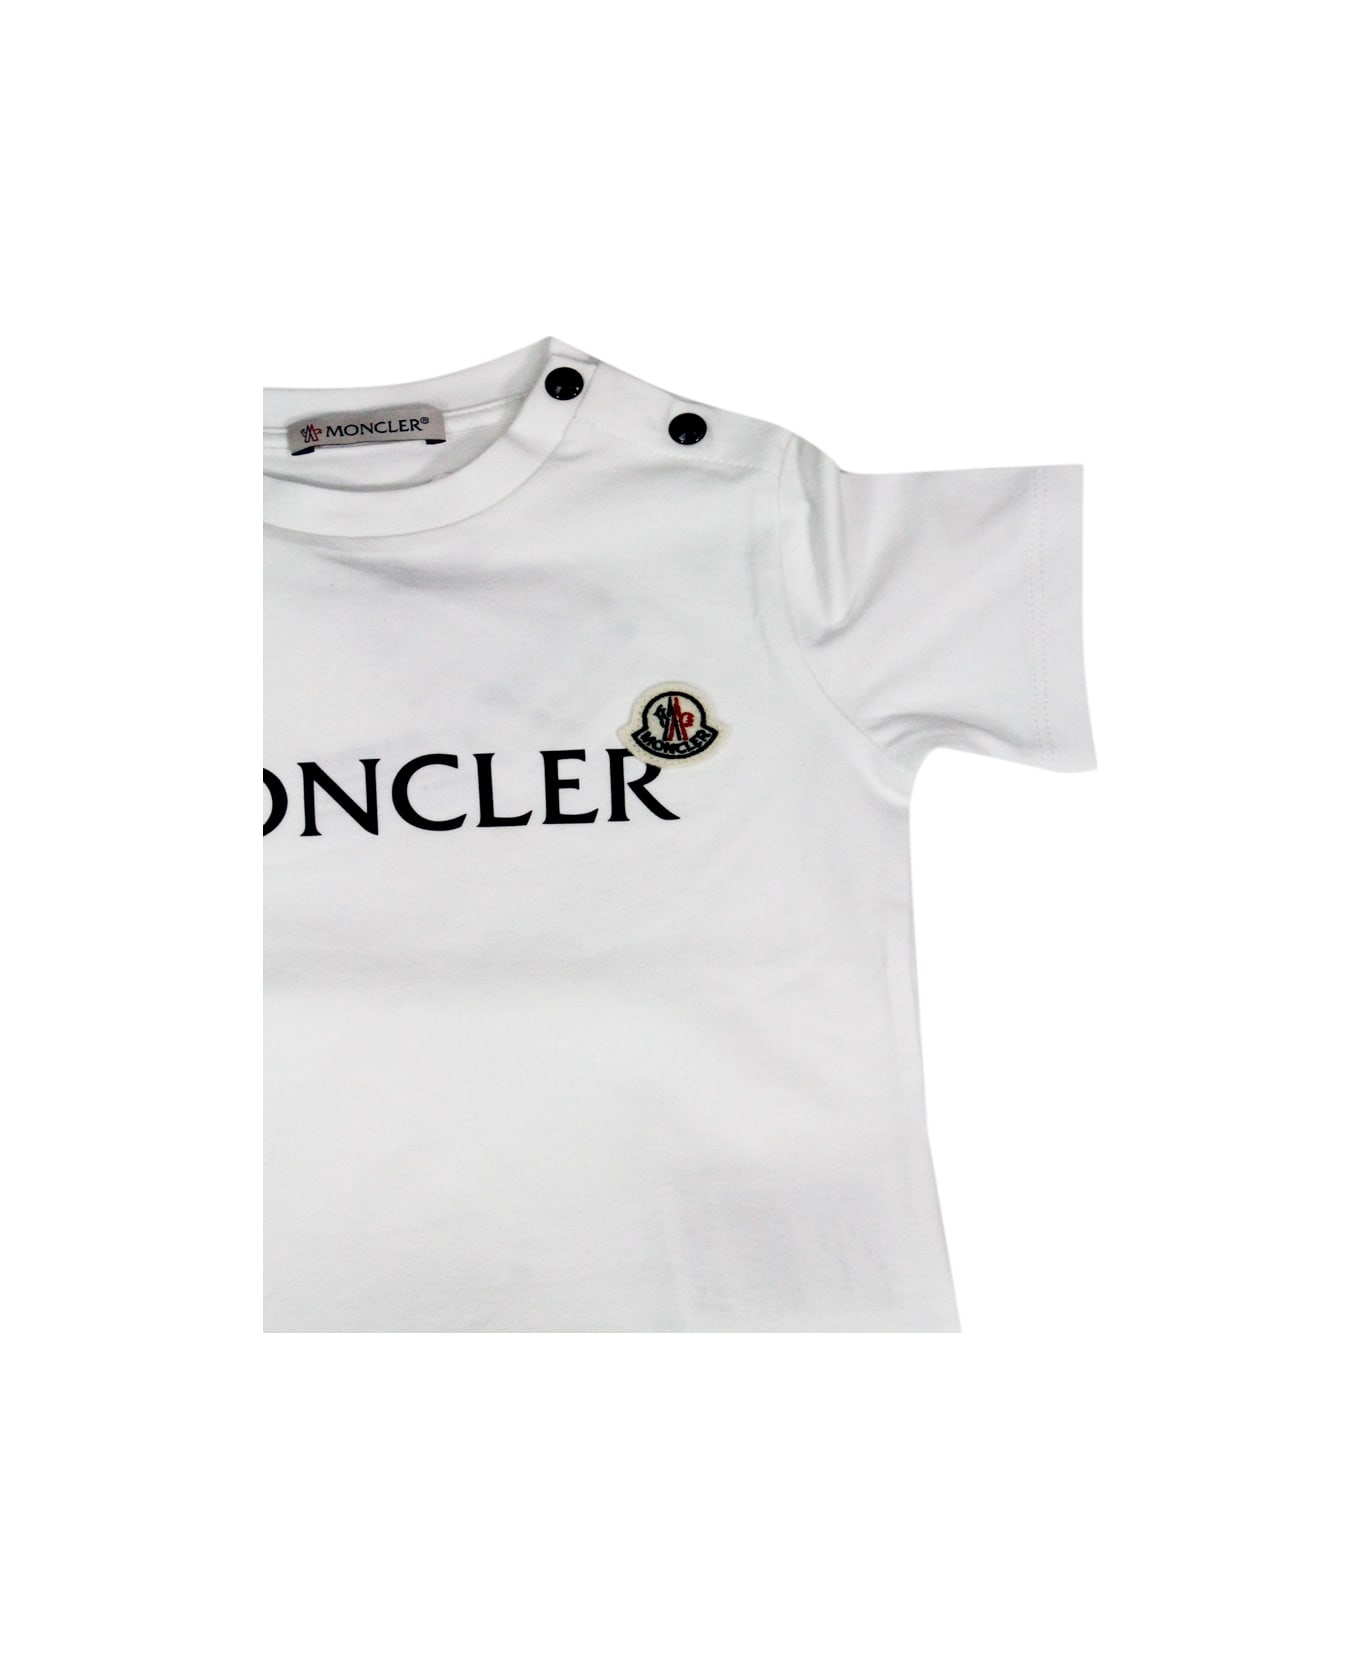 Moncler Complete With Short-sleeved Crew-neck T-shirt And Shorts With Elasticated Waist And Side Pockets. Logo On The Chest - White - Blu